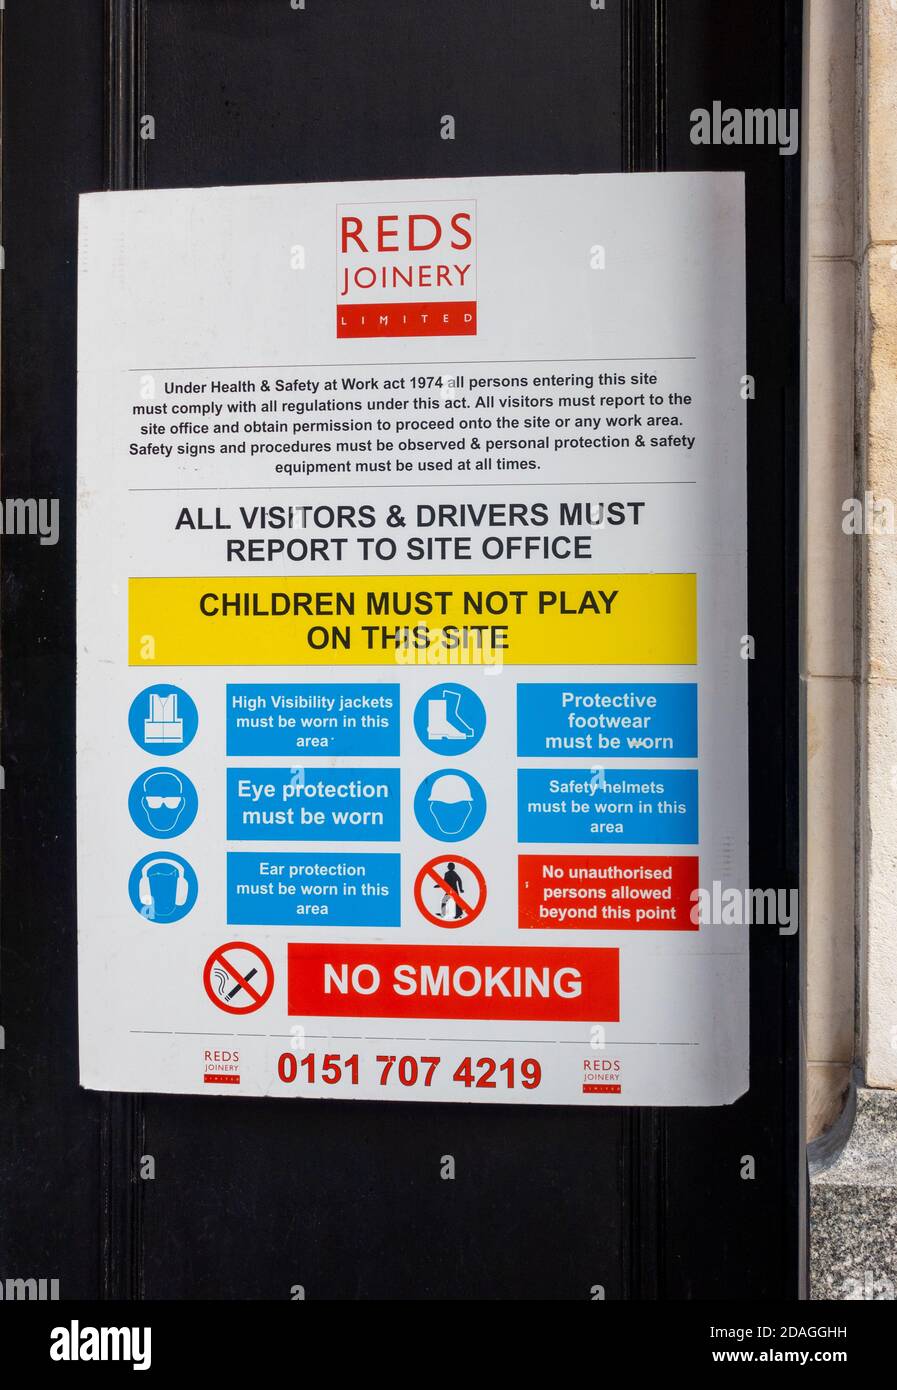 Reds Joinery sign with several instructions and warnings in Liverpool, England UK Stock Photo